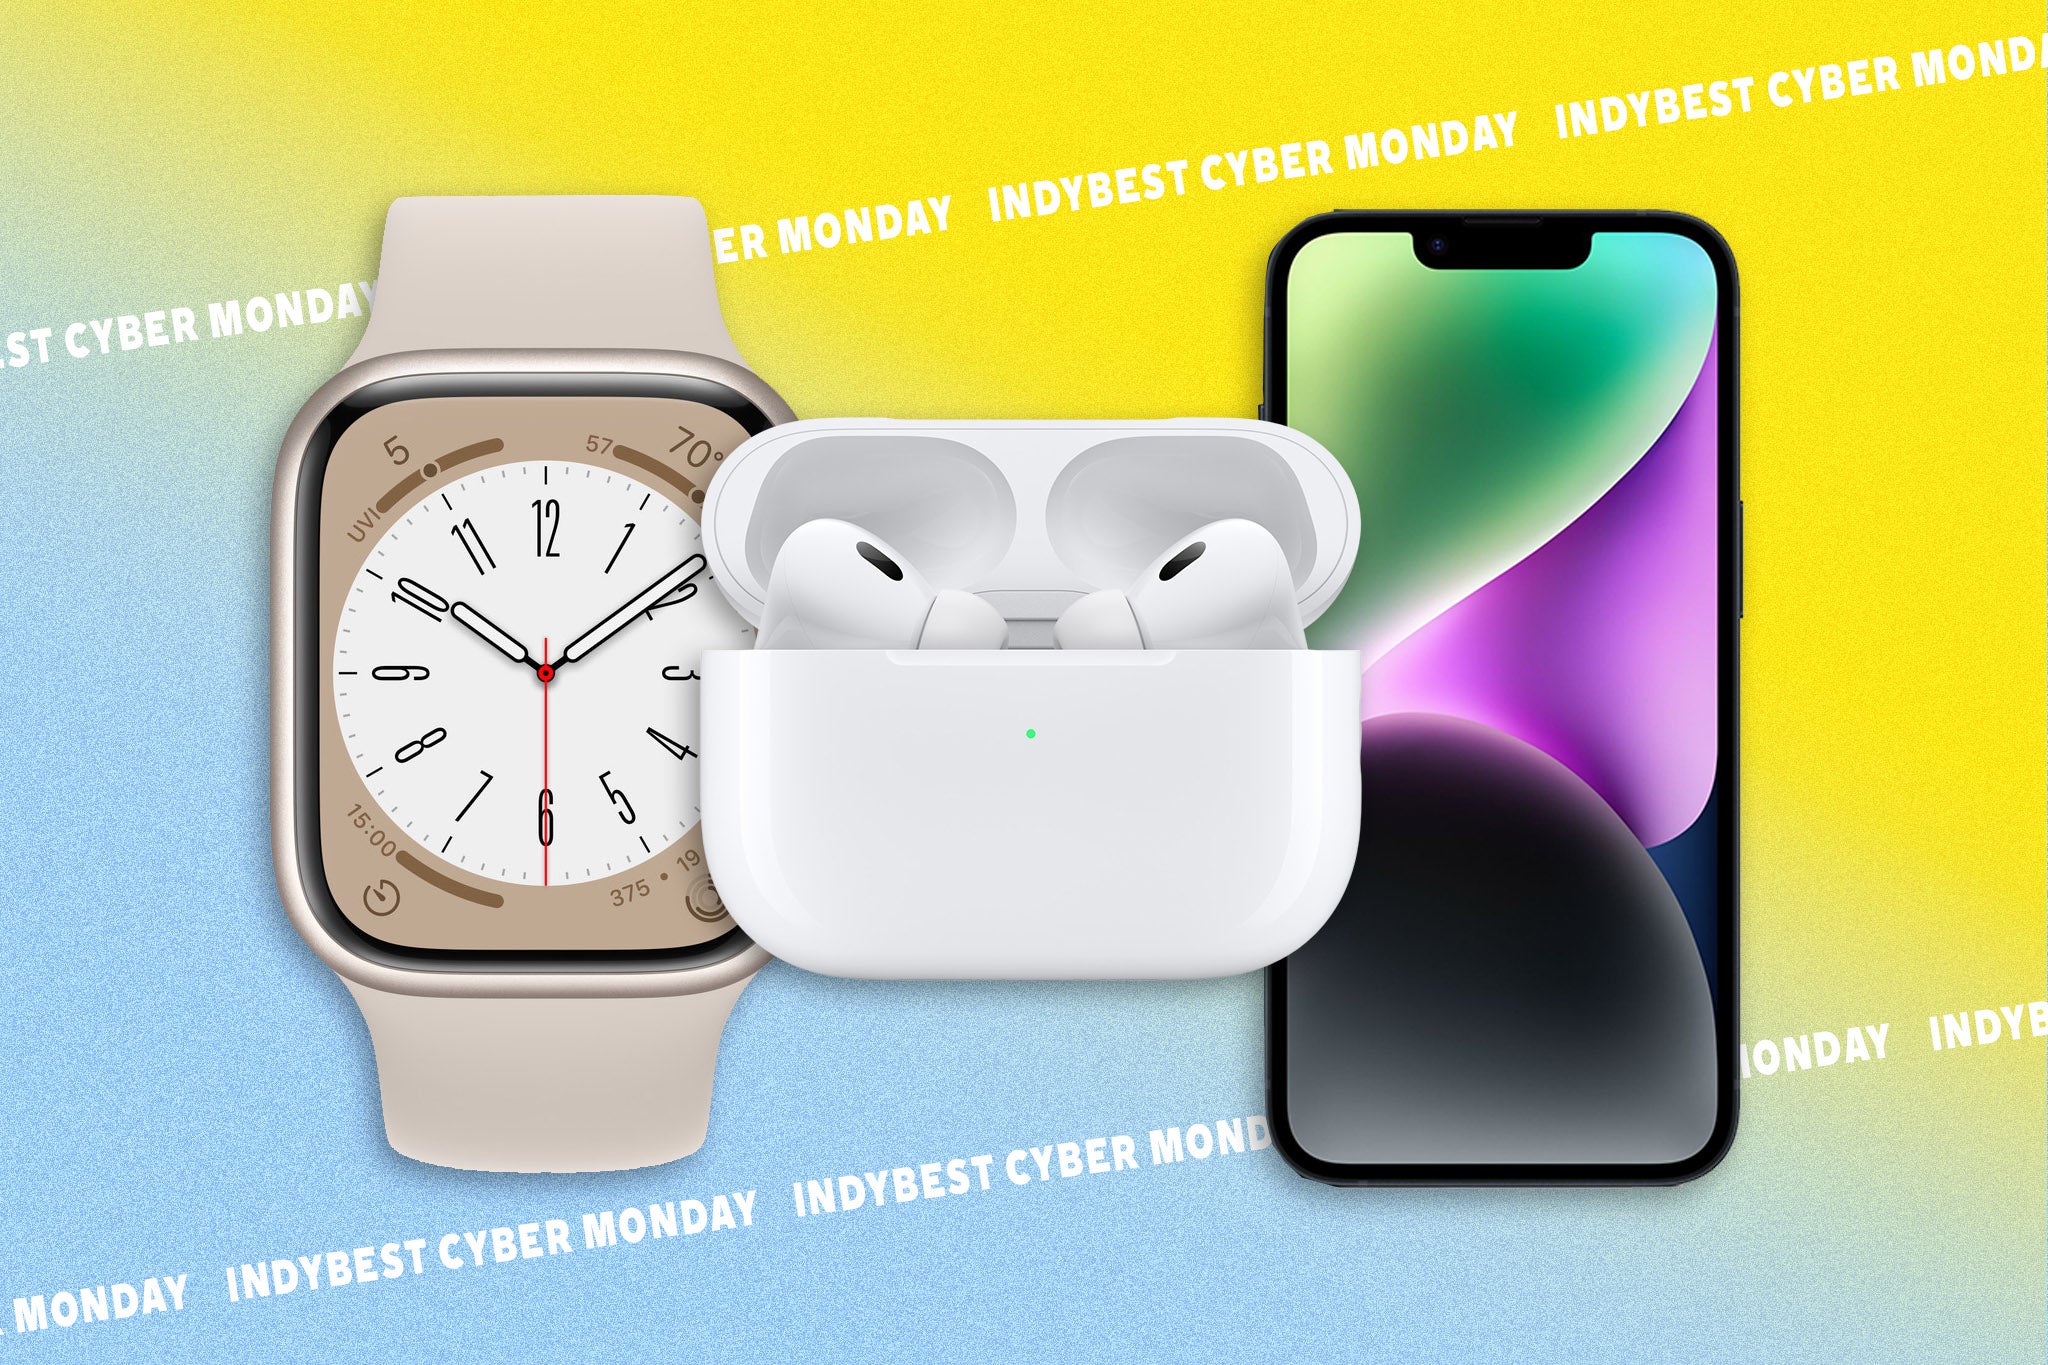 Apple has also launched its own shopping event to run alongside the Cyber Monday sale